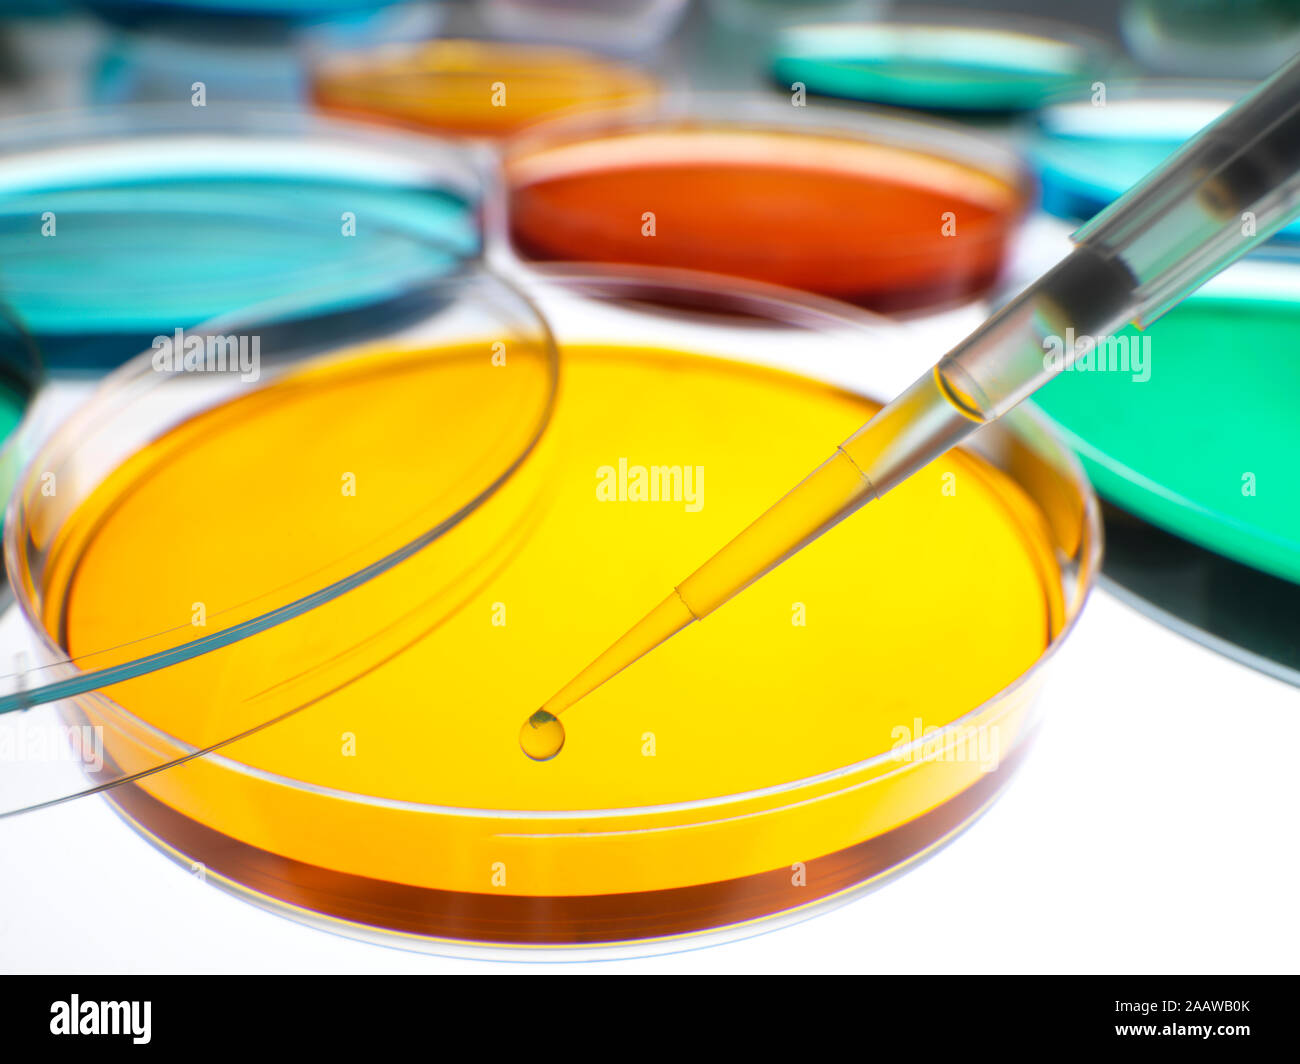 Close-up of samples pipetting in petri dishes containing agar jellies at laboratory Stock Photo